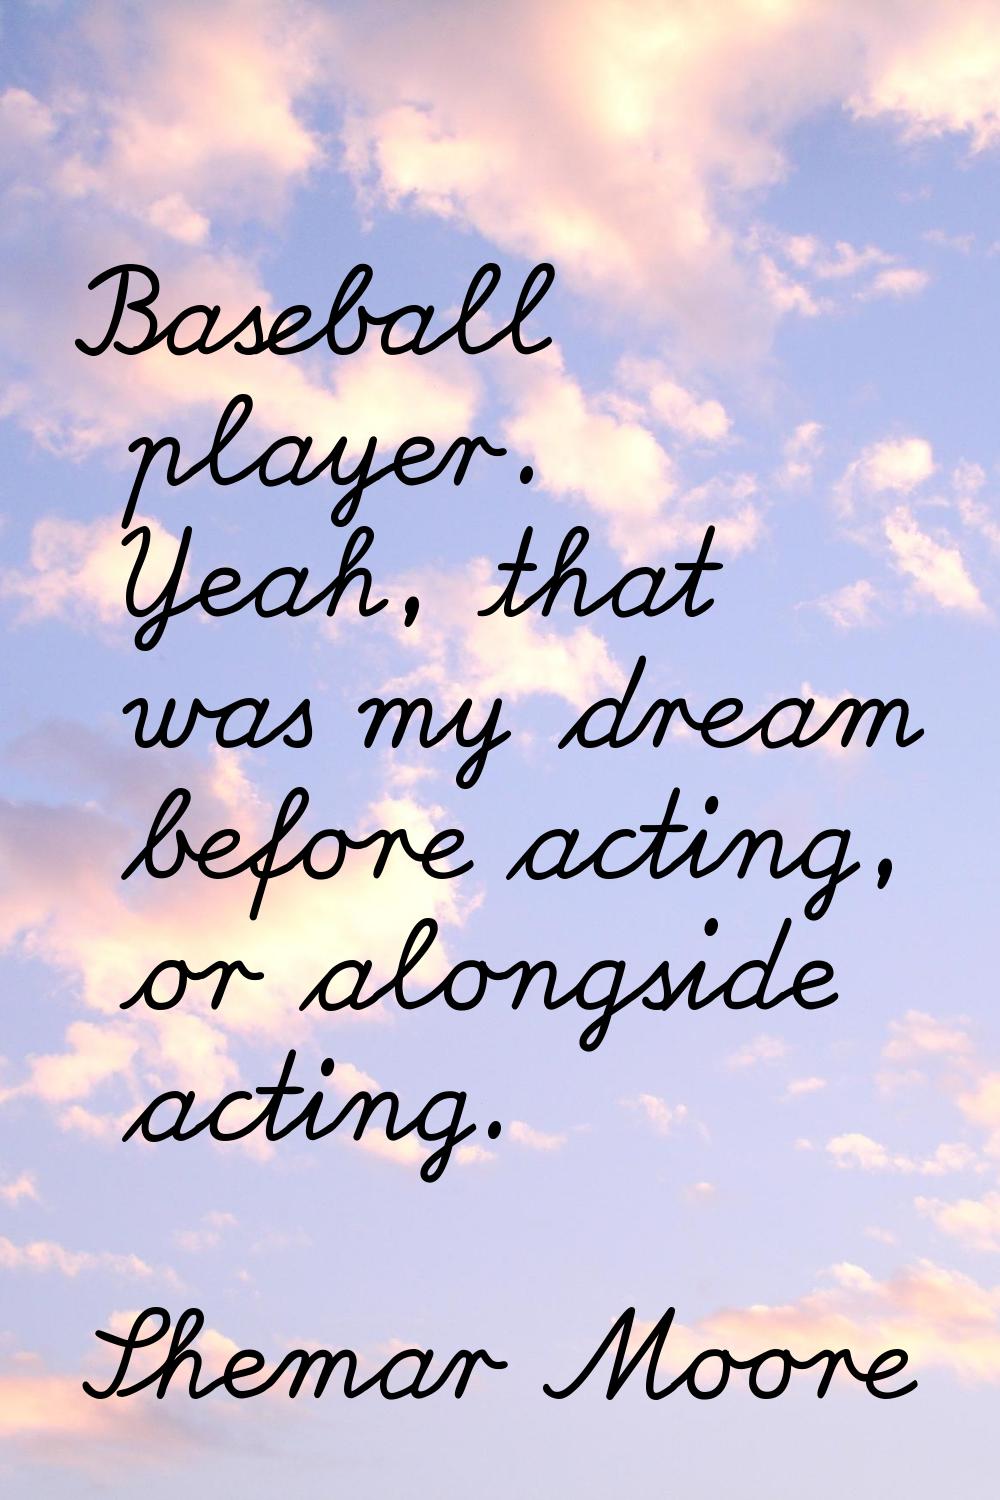 Baseball player. Yeah, that was my dream before acting, or alongside acting.